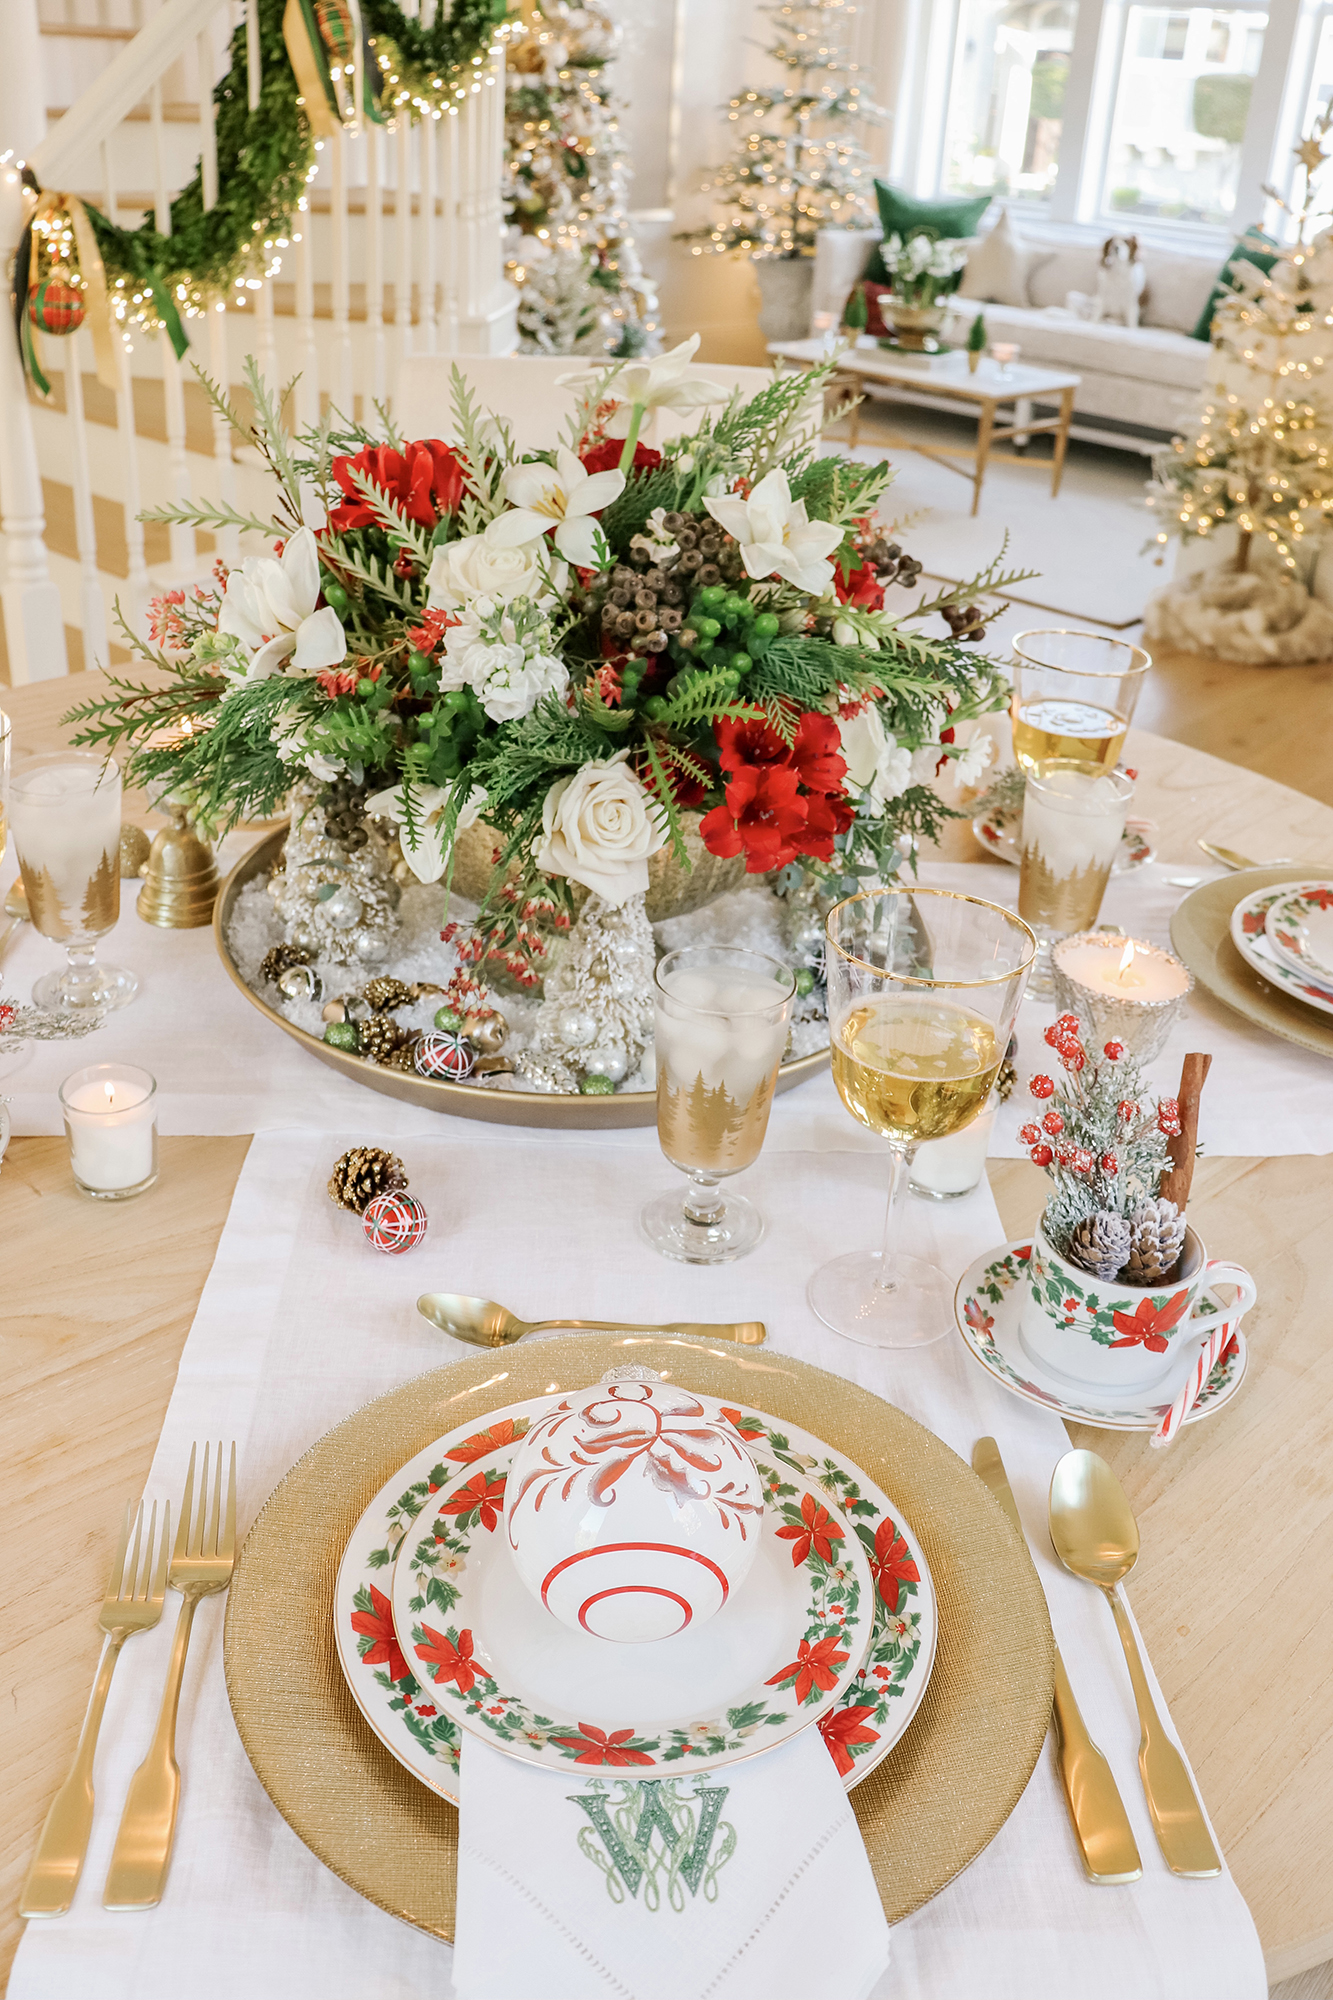 My 2020 Winter Tablescape with Vintage-Style Decor - Lovely decor pieces and affordable options at all price points, vintage christmas decor ideas